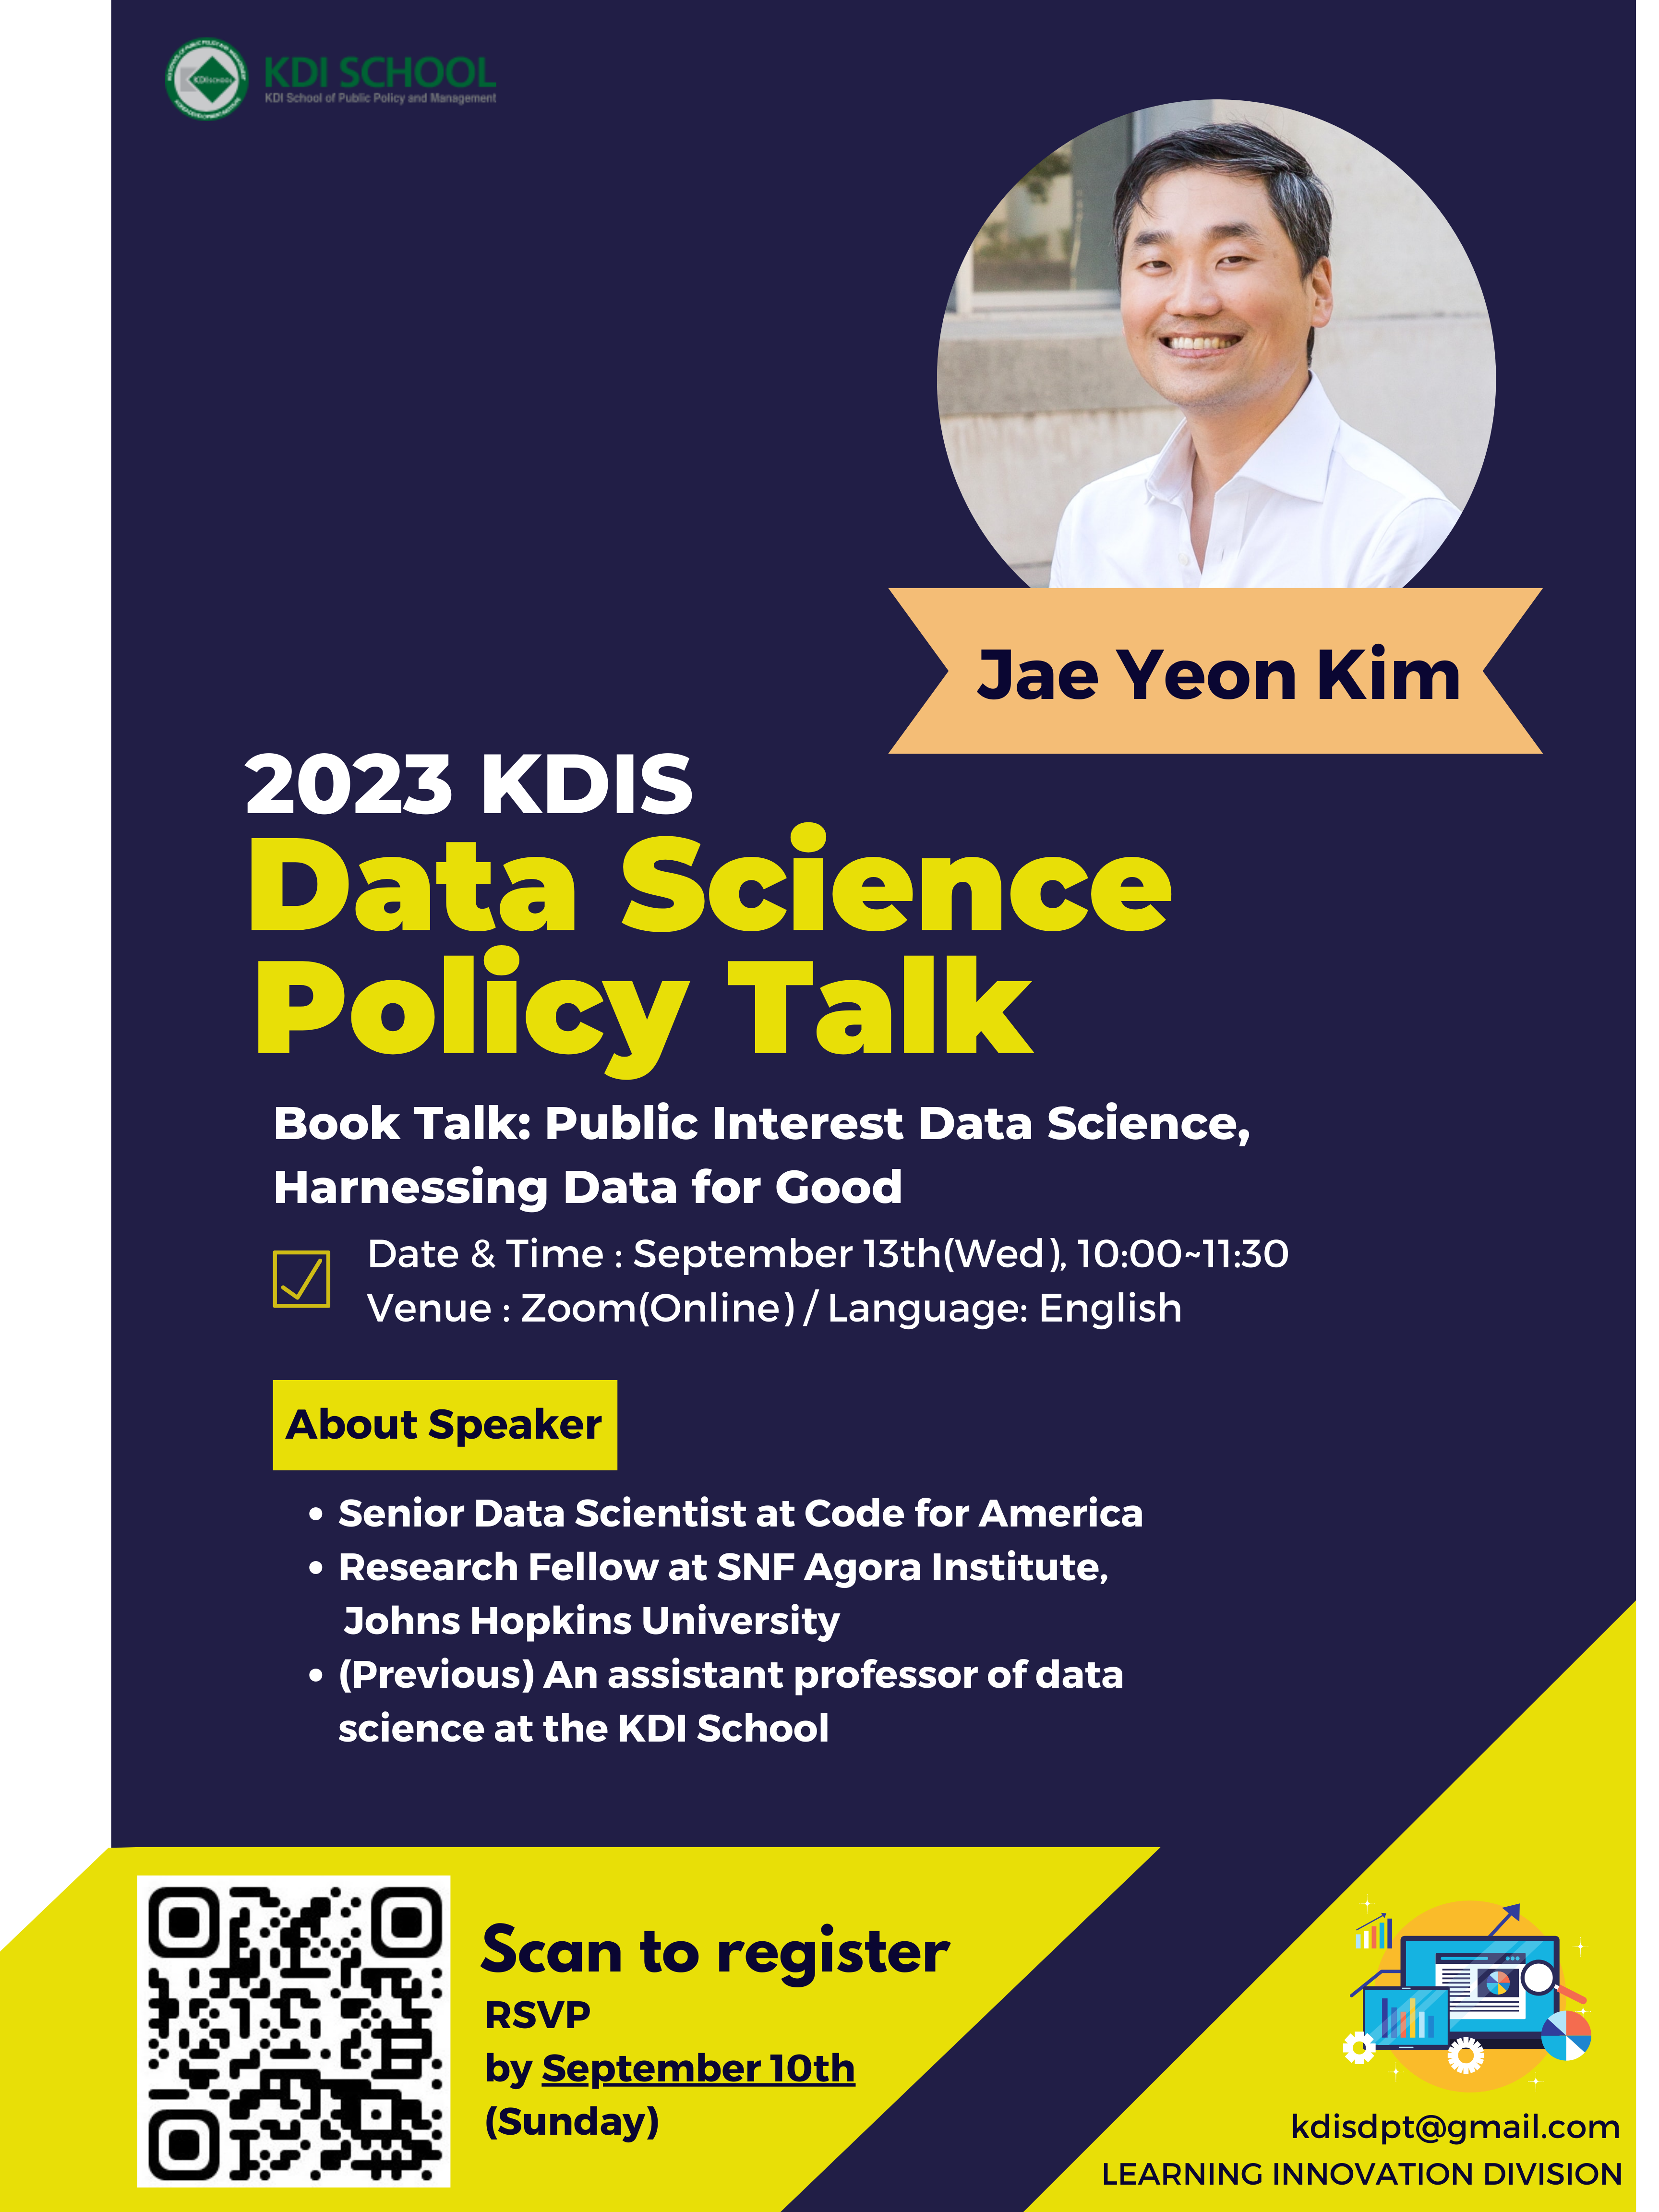      KDI SCHOOL     KDI School of Public Policy and Management     2023 KDIS Data Science Policy Talk     Jae Yeon Kim      Book Talk: Public Interest Data Science, Harnessing Data for Good     Date & Time : September 13th (Wed), 10:00~11:30 Venue : Zoom (Online) / Language: English     About Speaker     Senior Data Scientist at Code for America / Research Fellow at SNF Agora Institute,Johns Hopkins University / (Previous) An assistant professor of data science at the KDI School     Scan to register     RSVP     by September 10th     (Sunday)     kdisdpt@gmail.com     LEARNING INNOVATION DIVISION     